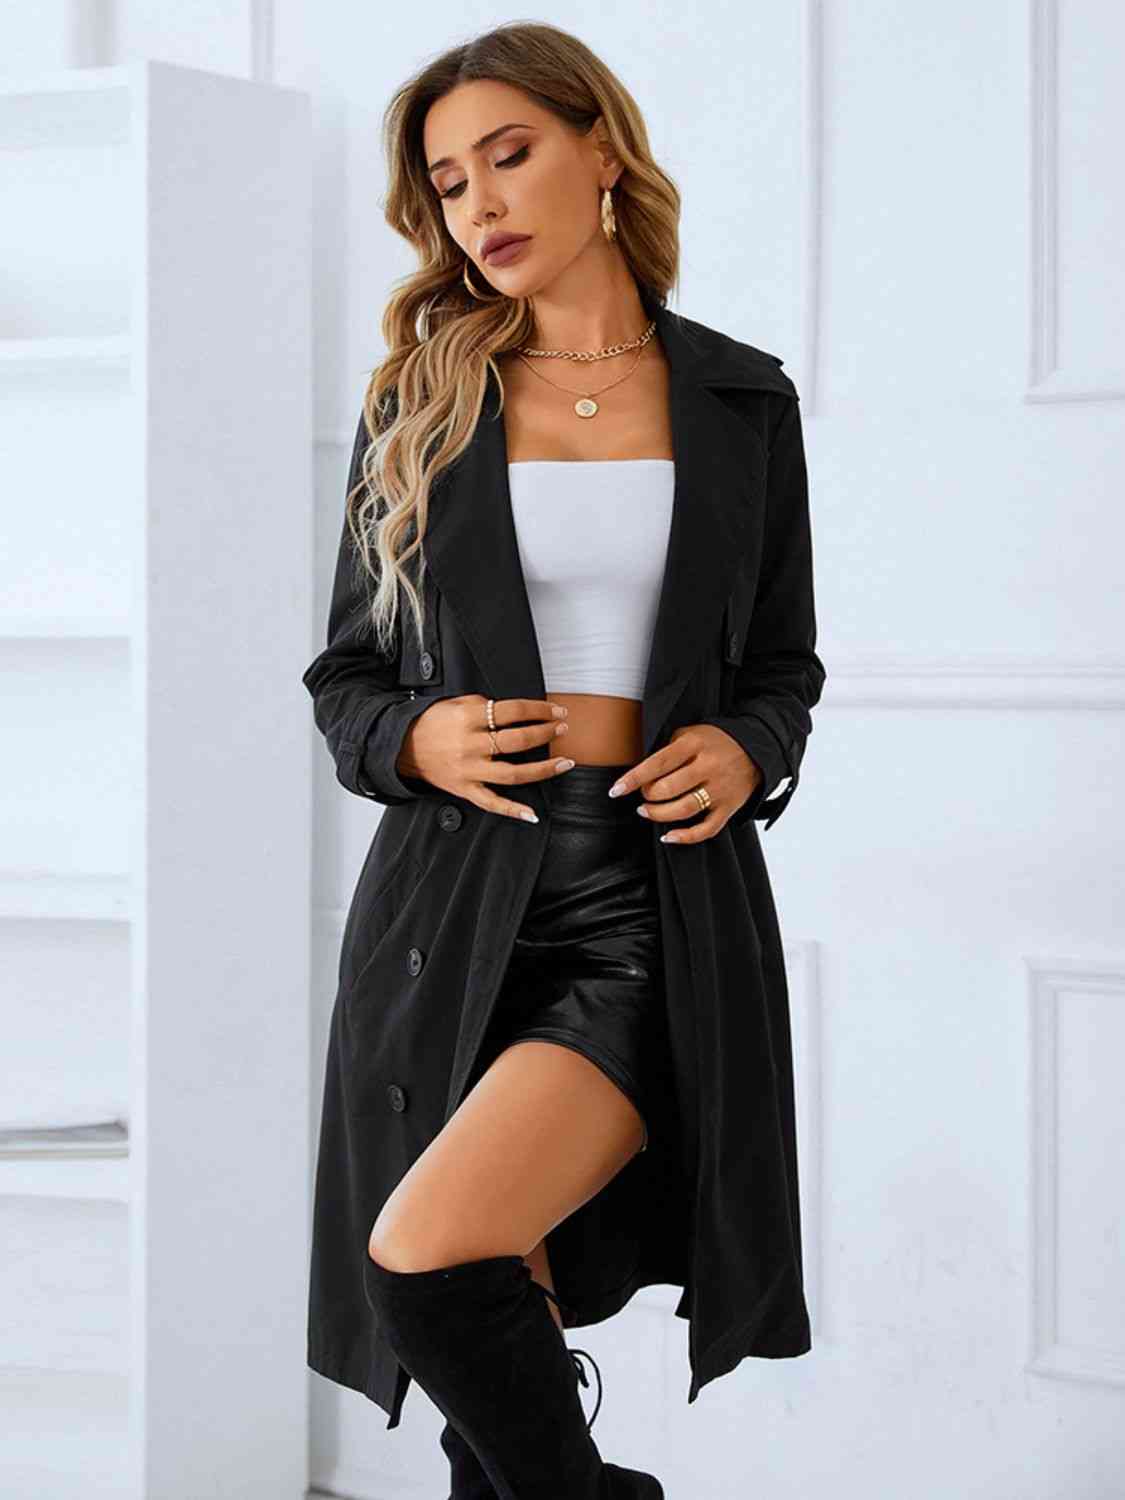 Tie Belt Double-Breasted Trench Coat - Bellisima Clothing Collective